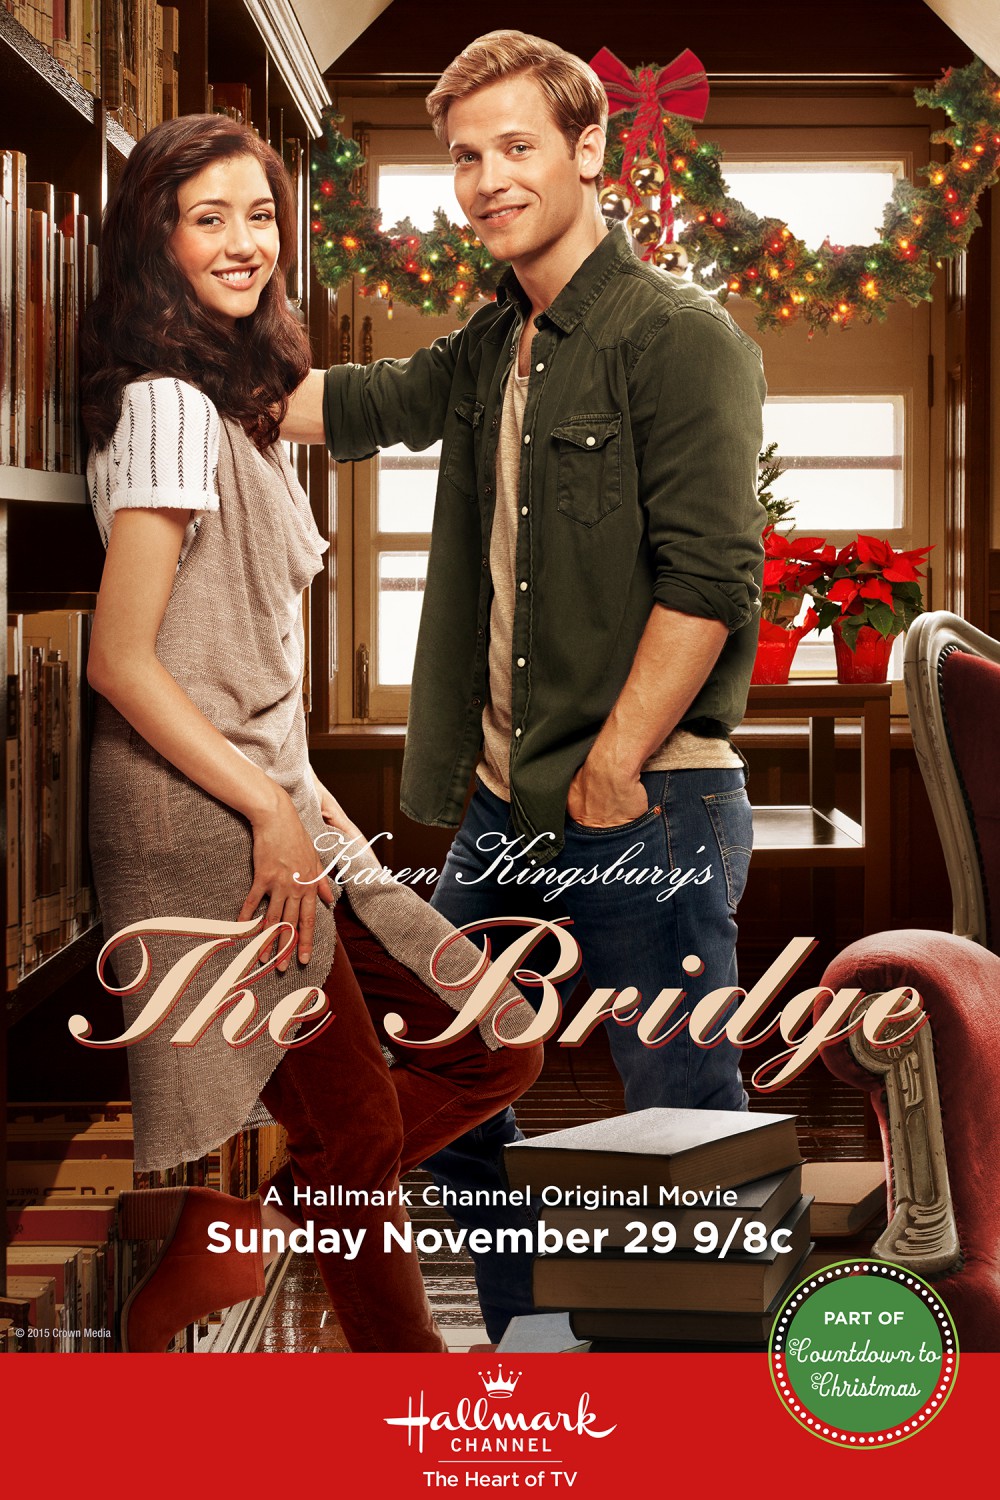 Extra Large TV Poster Image for The Bridge 